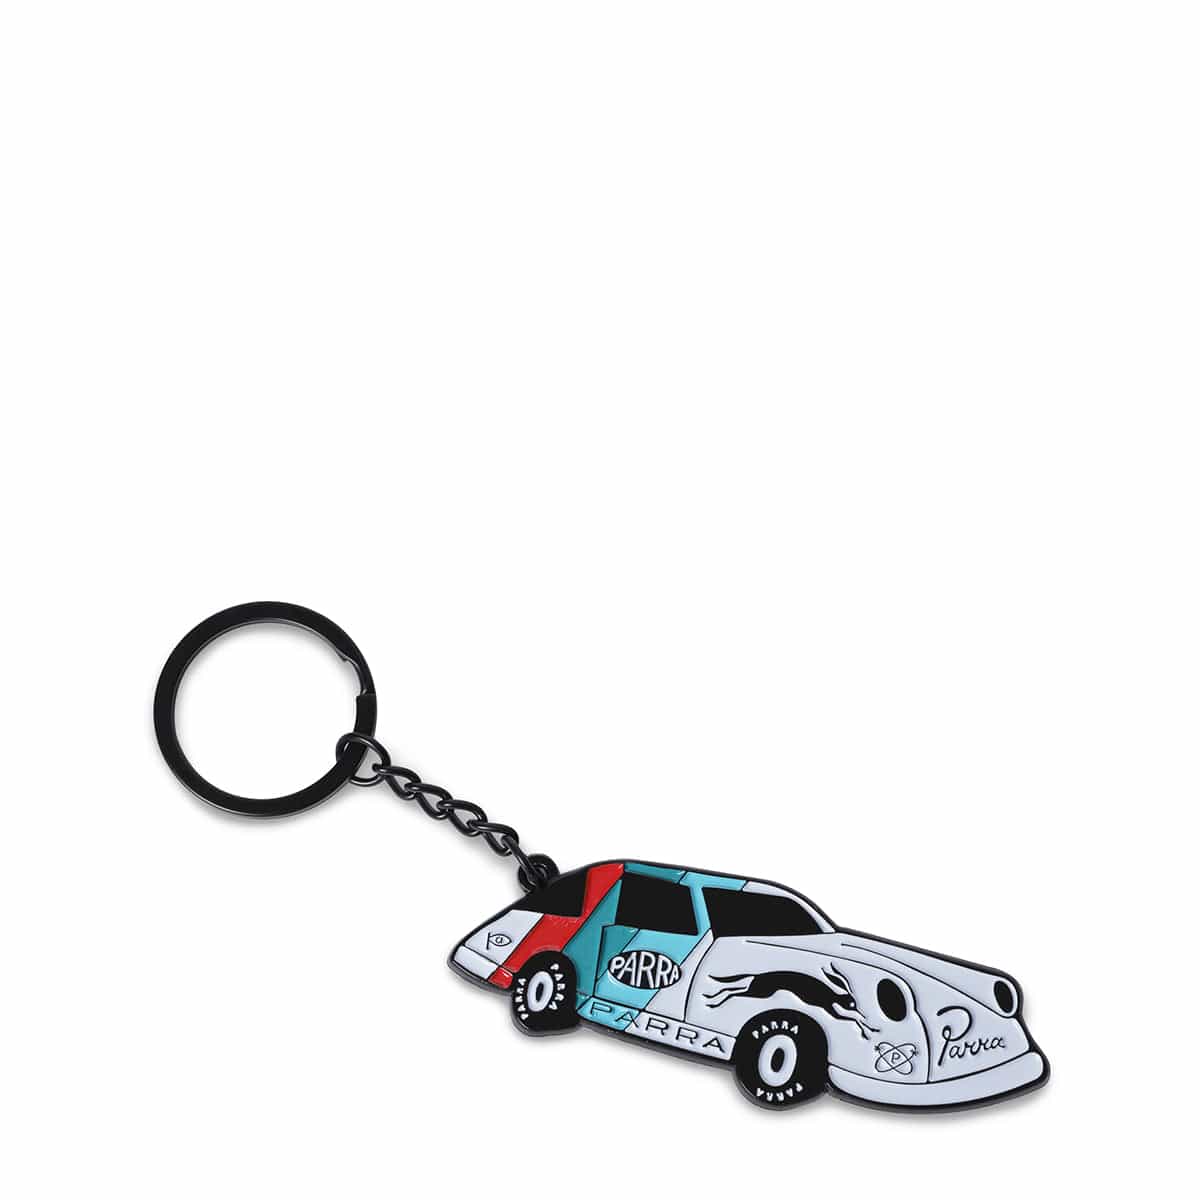 By Parra Odds & Ends MULTI / O/S PARRA RACING TEAM METAL KEY CHAIN